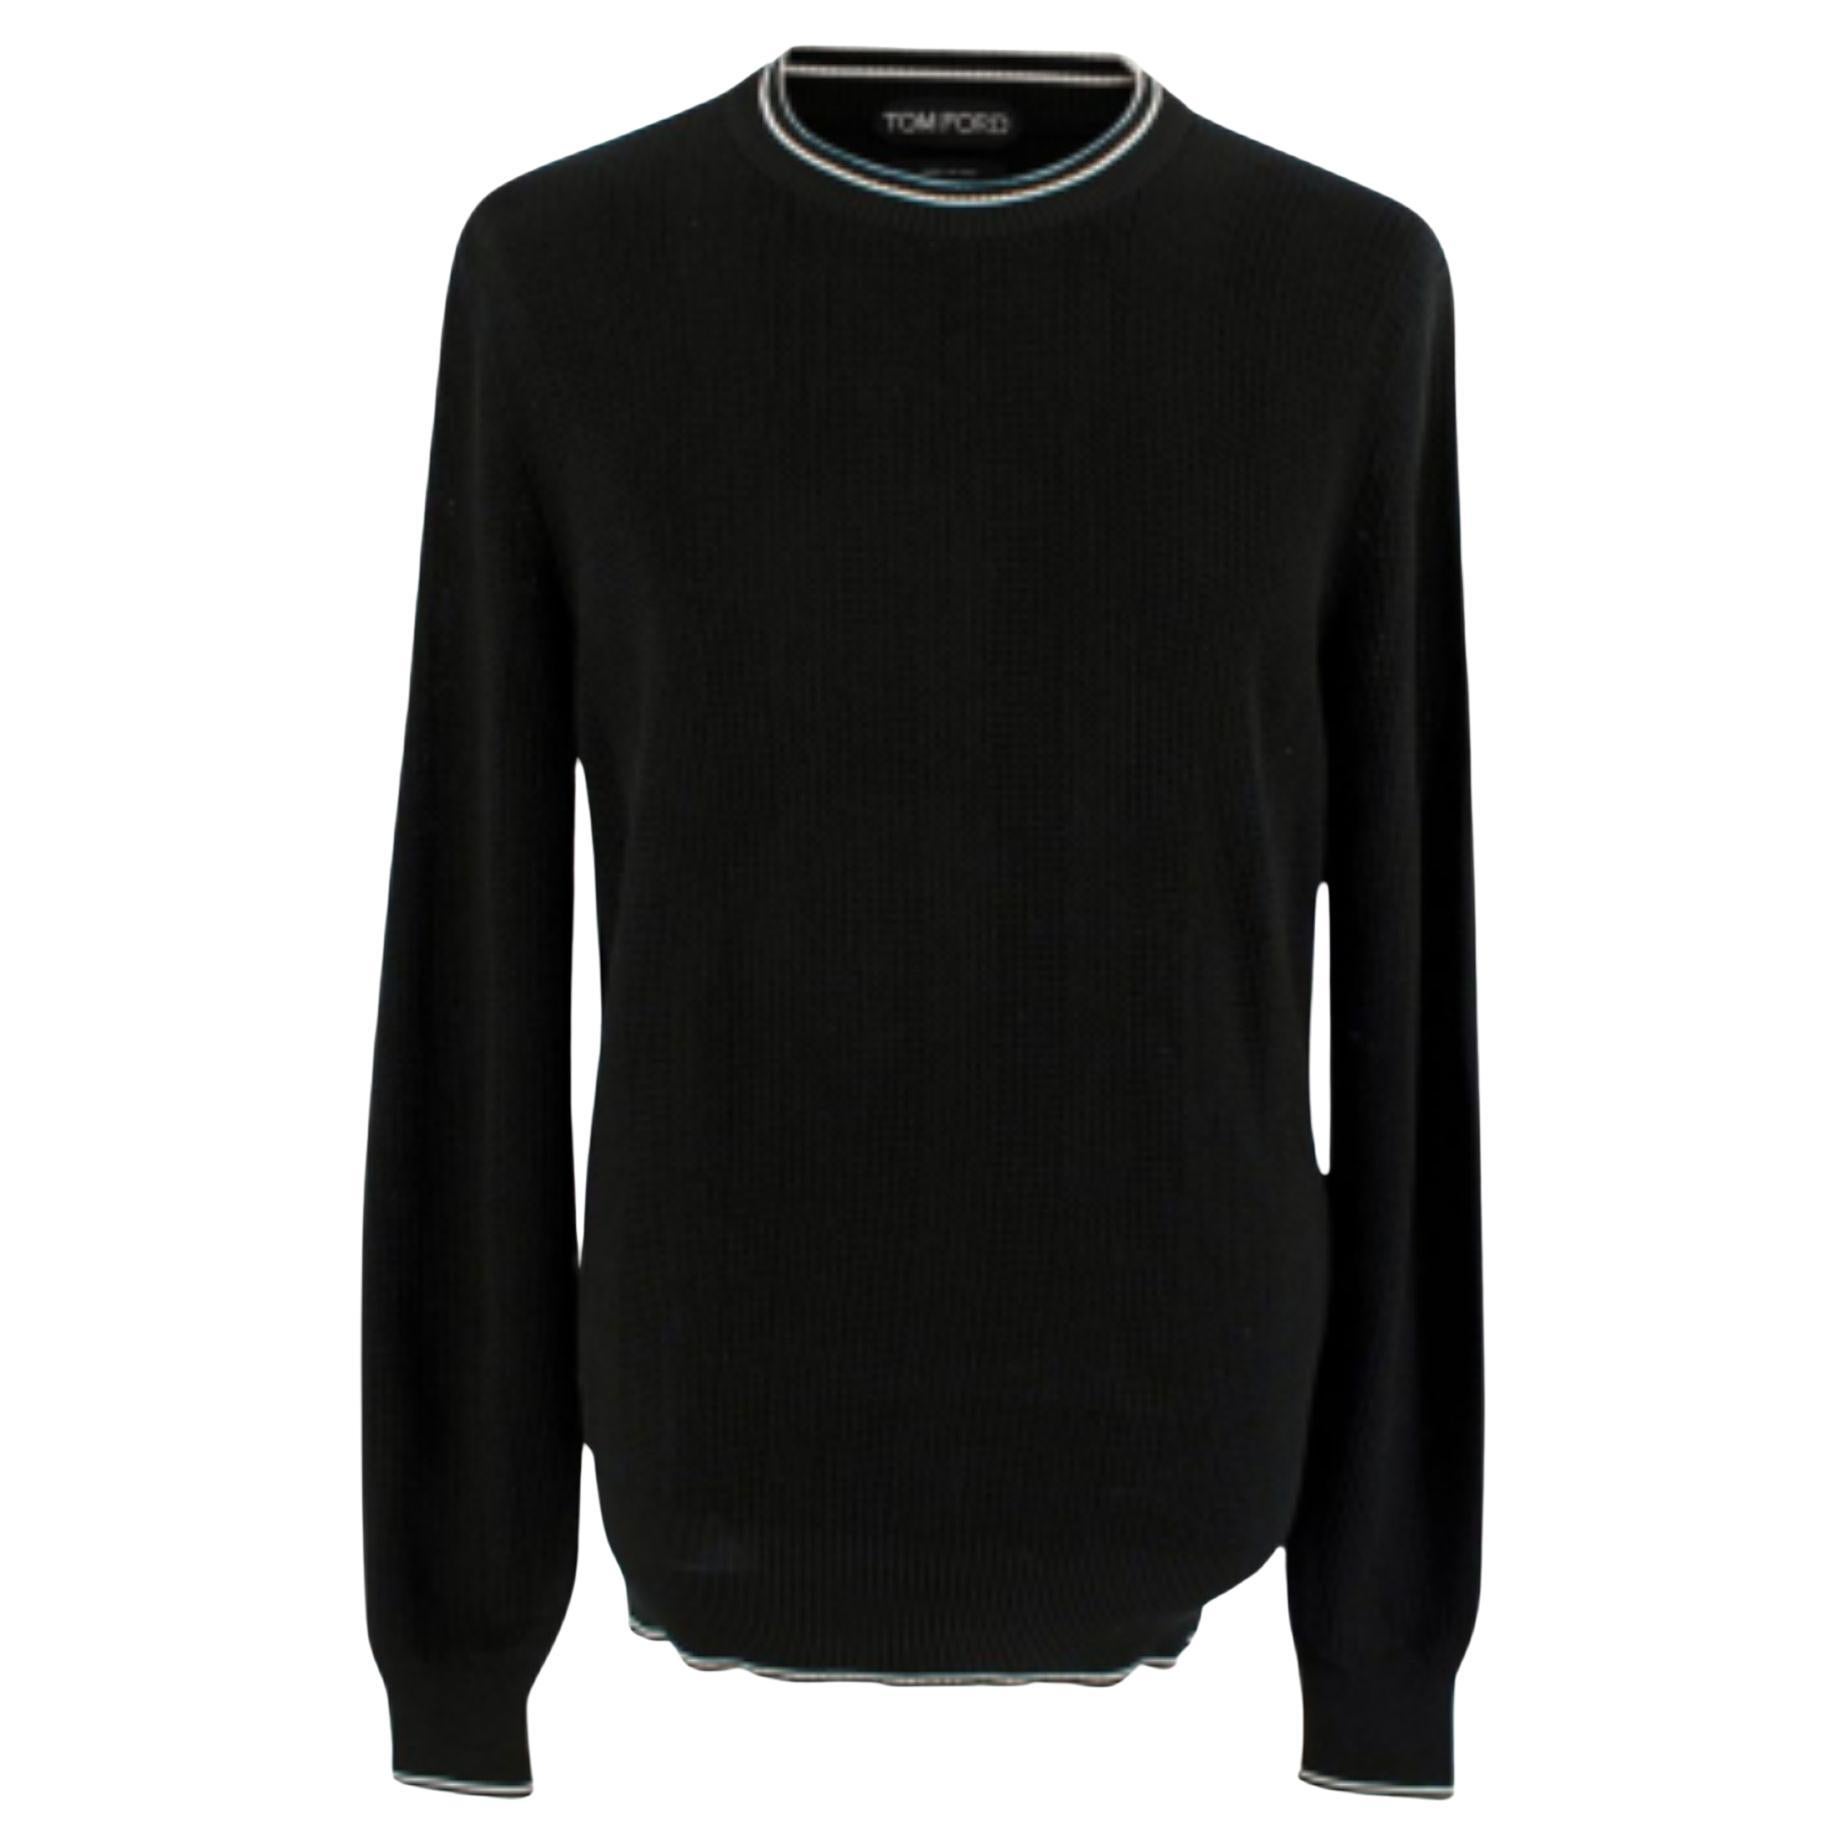 Tom Ford Black Silk & Cotton Knitted Jumper For Sale